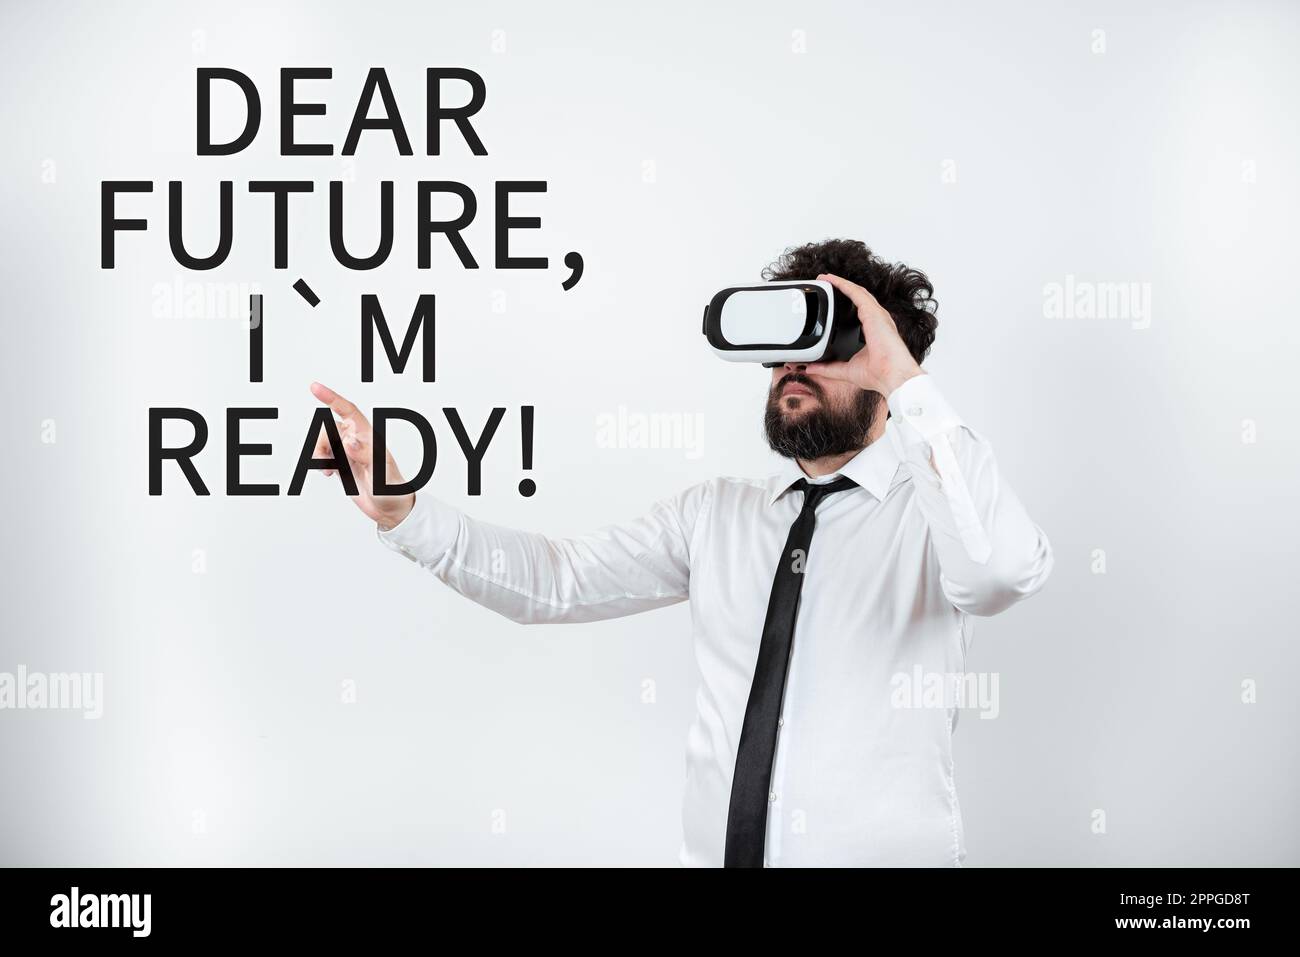 Hand writing sign Dear Future, I'M Ready. Internet Concept Confident to move ahead or to face the future Stock Photo